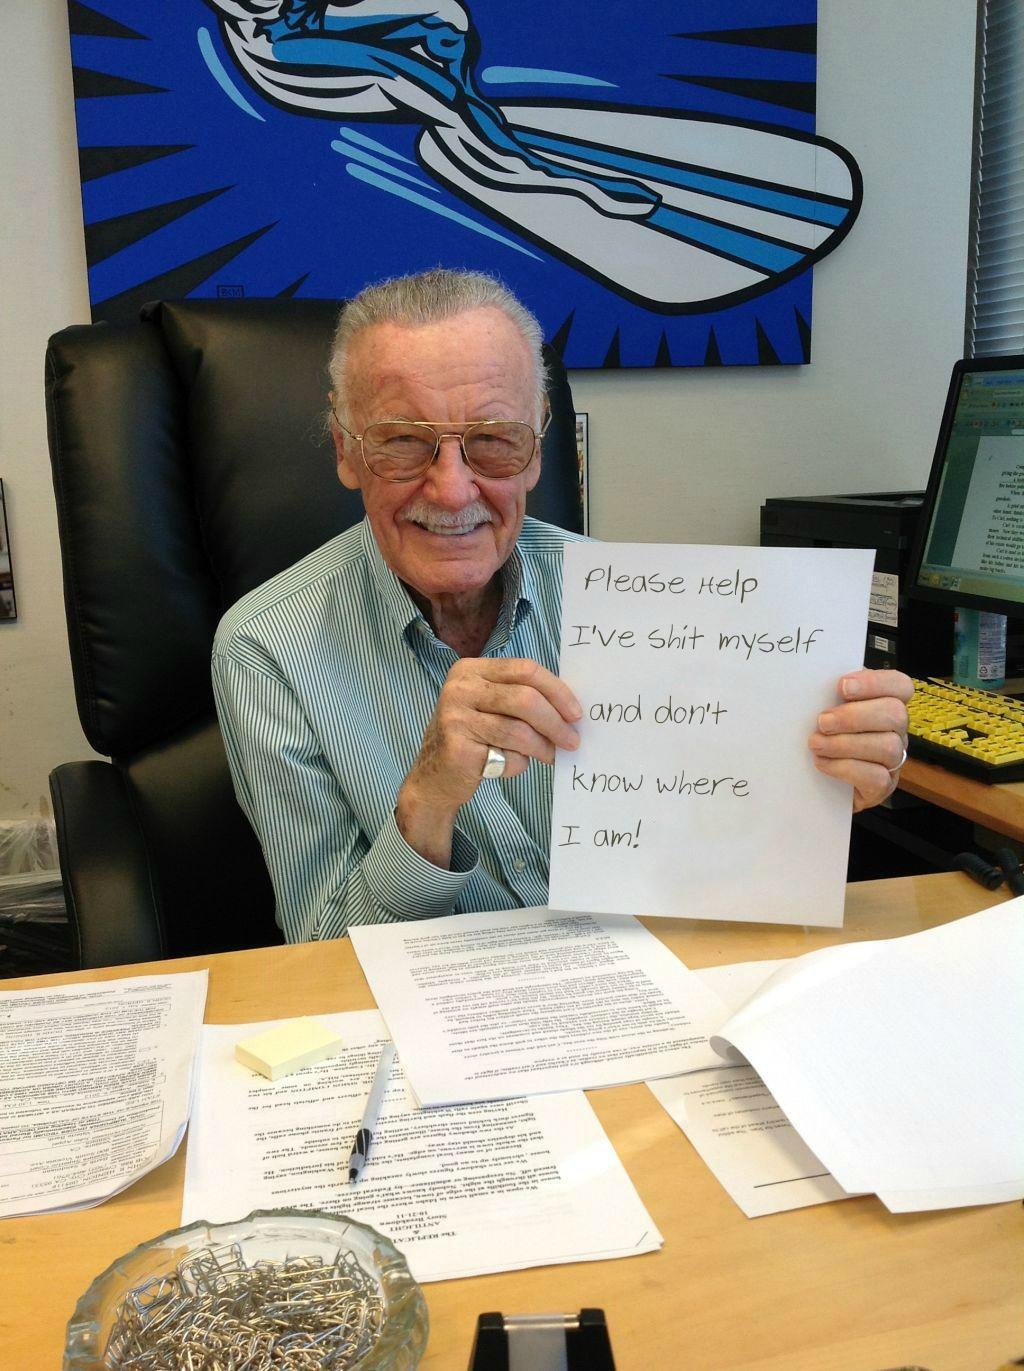 I found this www.stanleesaid.com and just couldn't resist